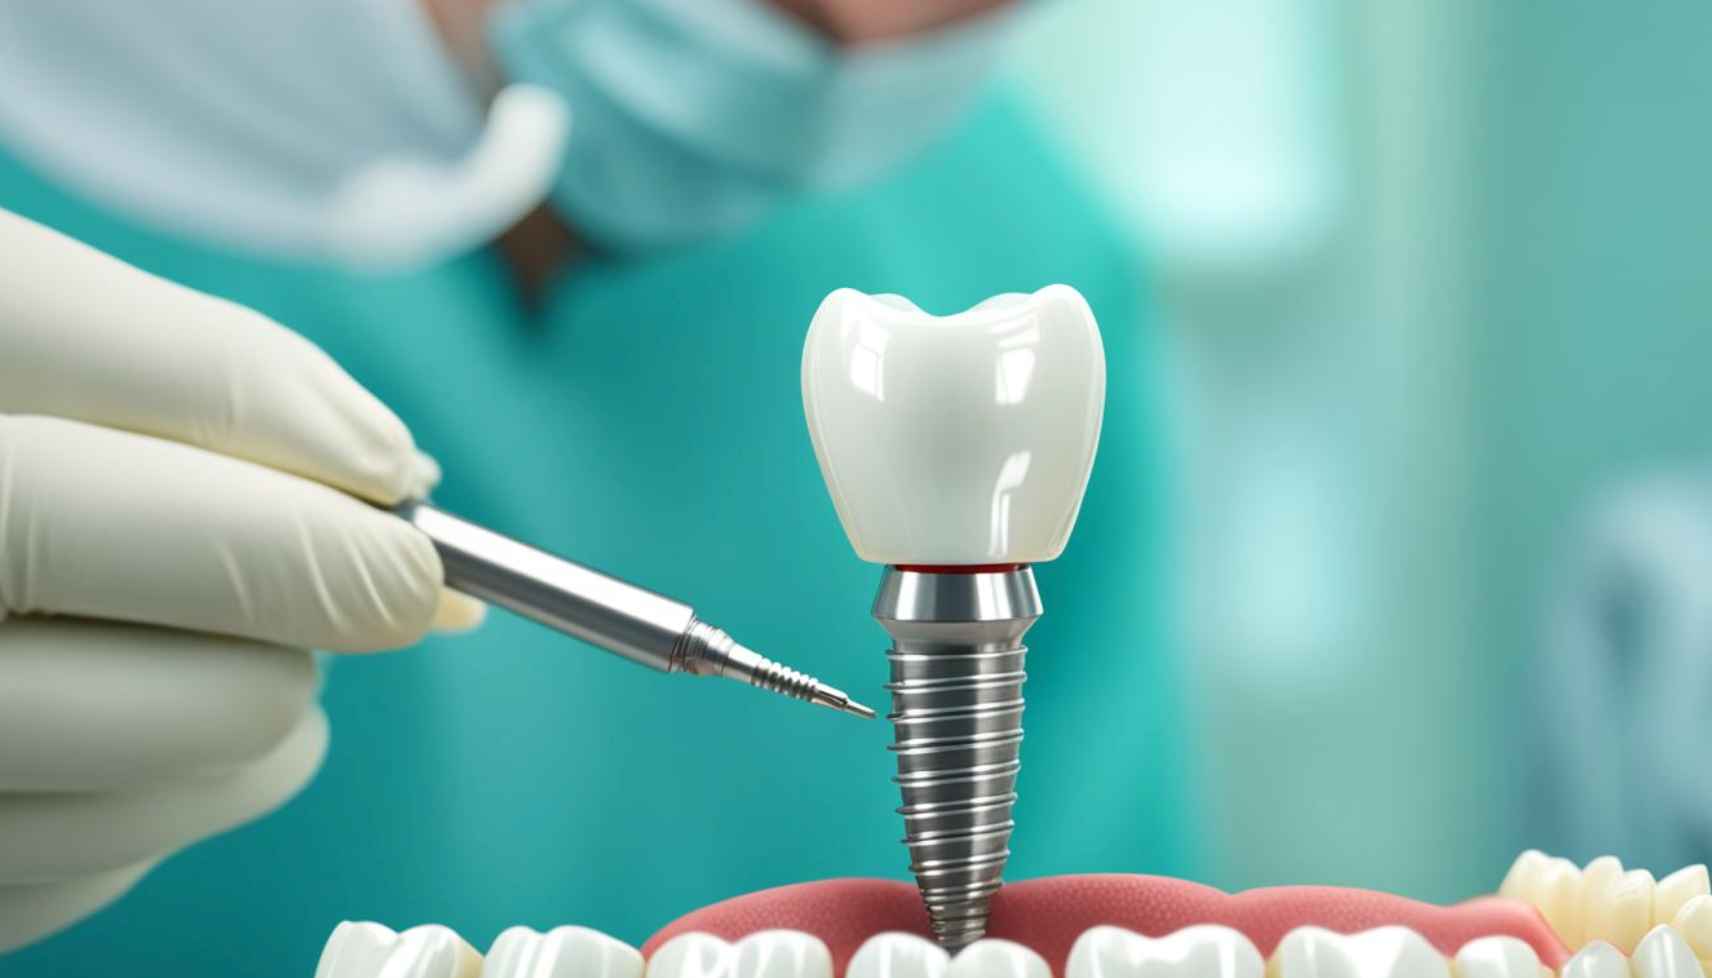 image of tooth implants